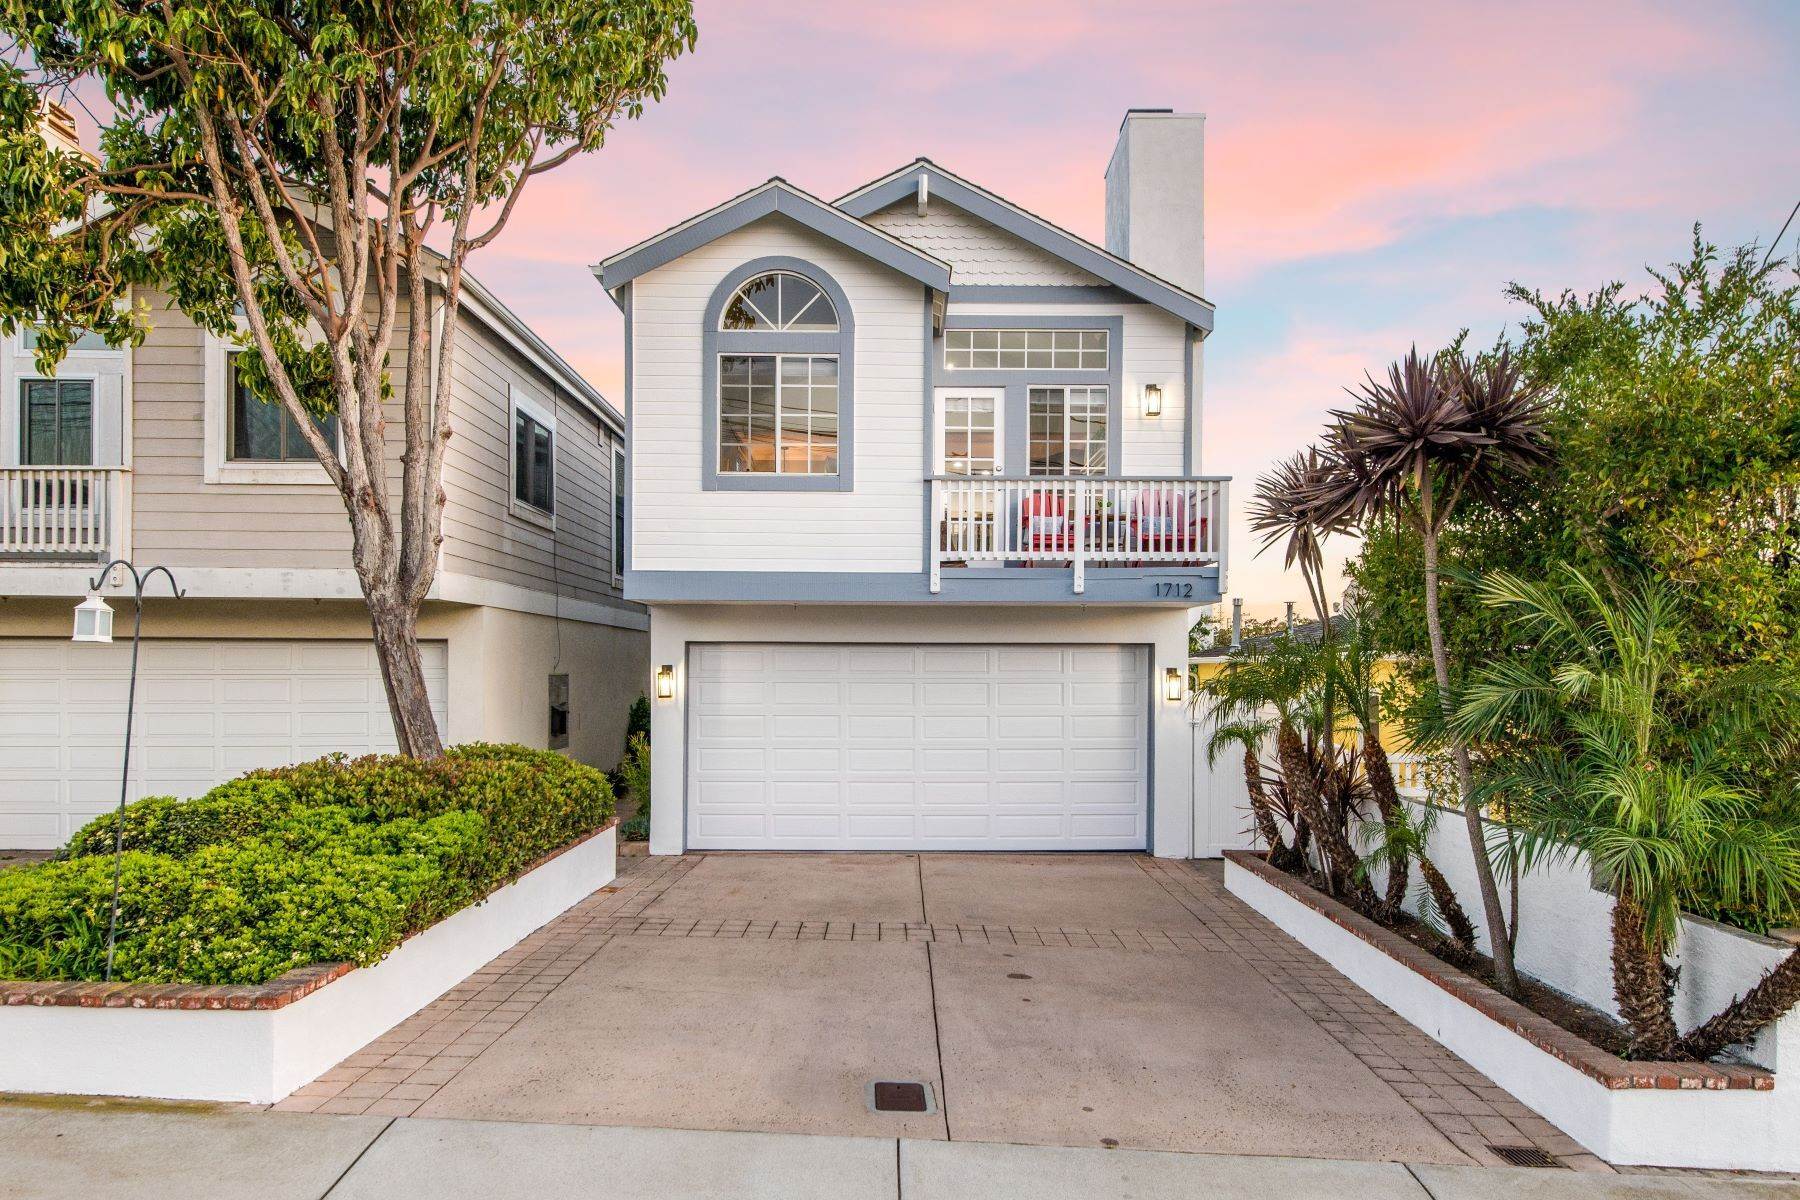 Single Family Homes for Sale at 1712 Speyer Lane, Redondo Beach, CA 90278 1712 Speyer Lane Redondo Beach, California 90278 United States